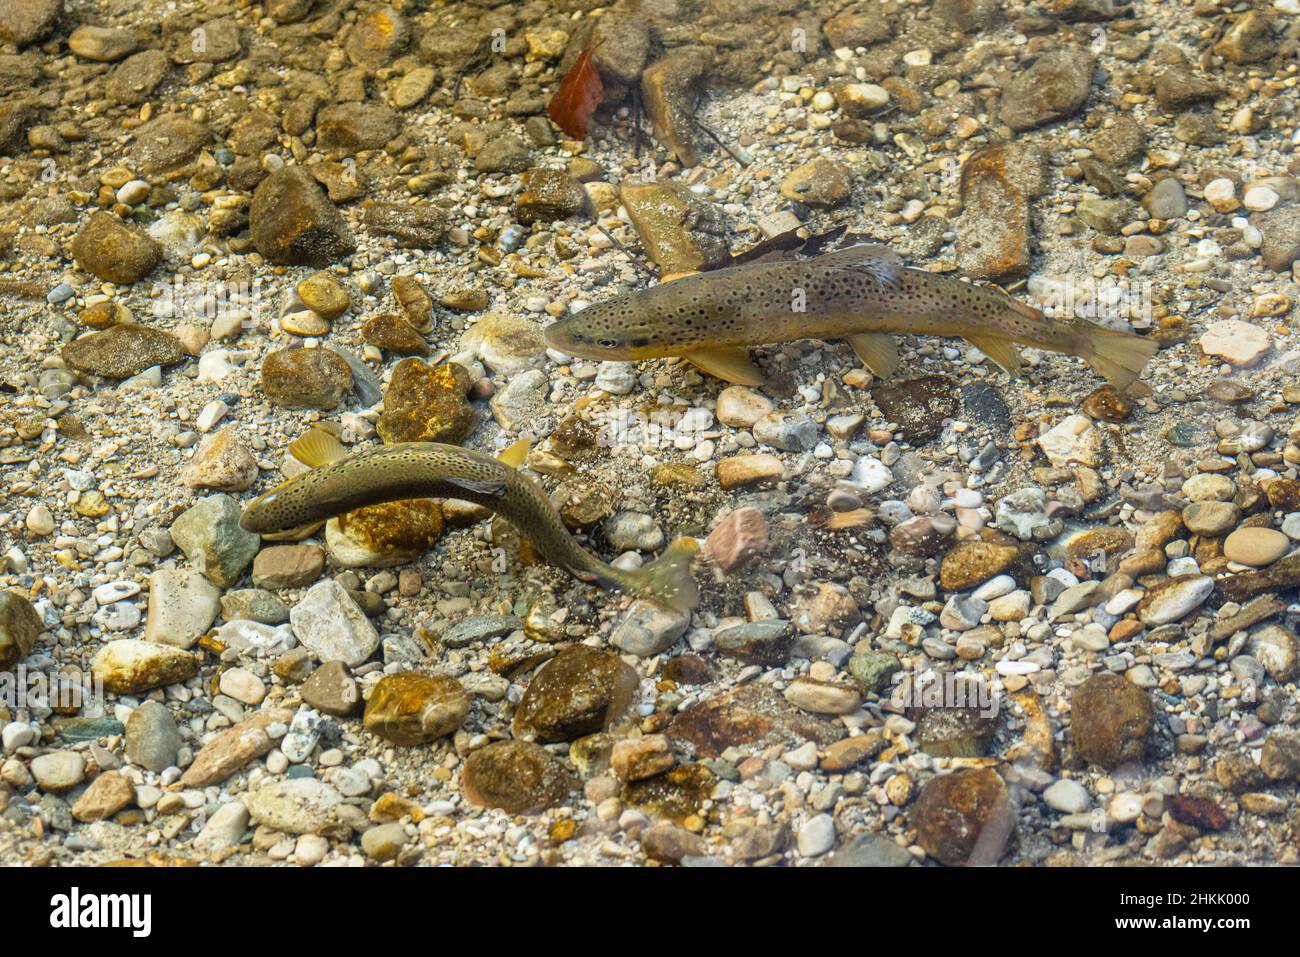 brown trout, river trout, brook trout (Salmo trutta fario), spawning pair, female digging spawning pit, Germany, Bavaria Stock Photo